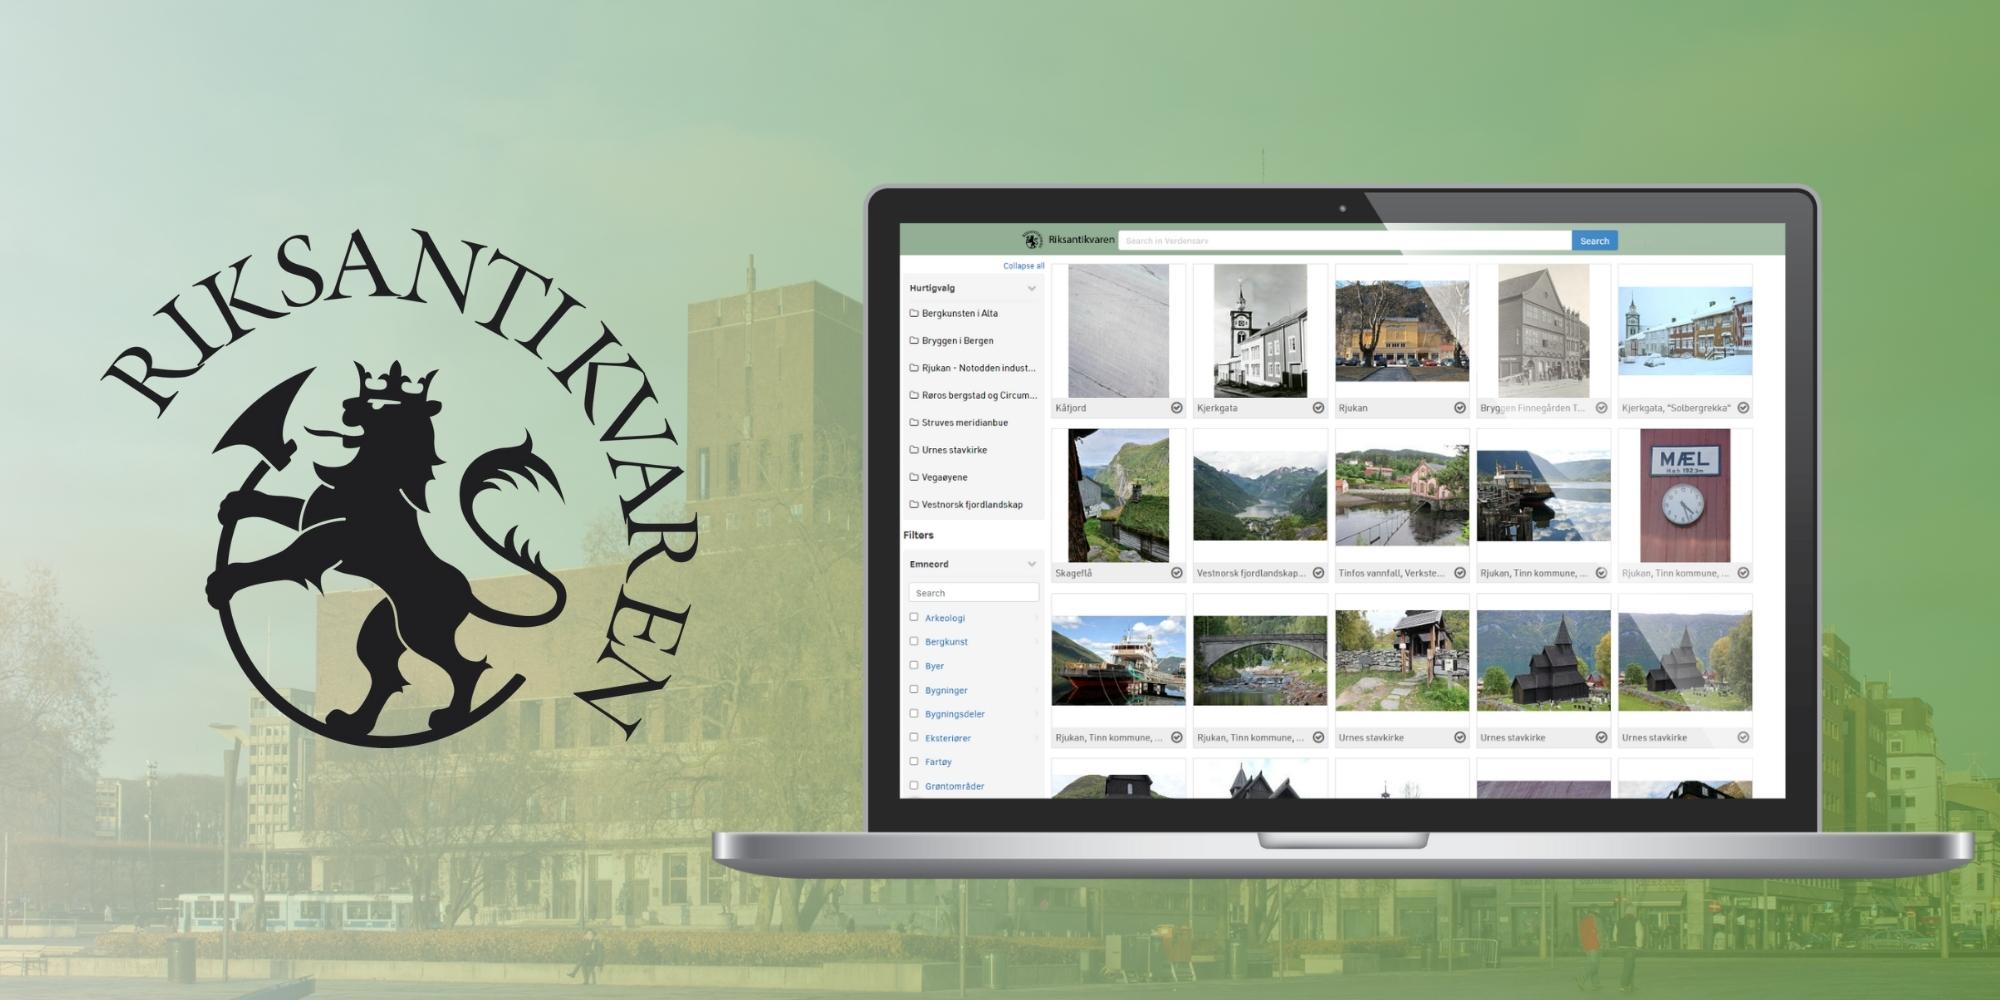 Making cultural heritage documentation publicly available with FotoWare